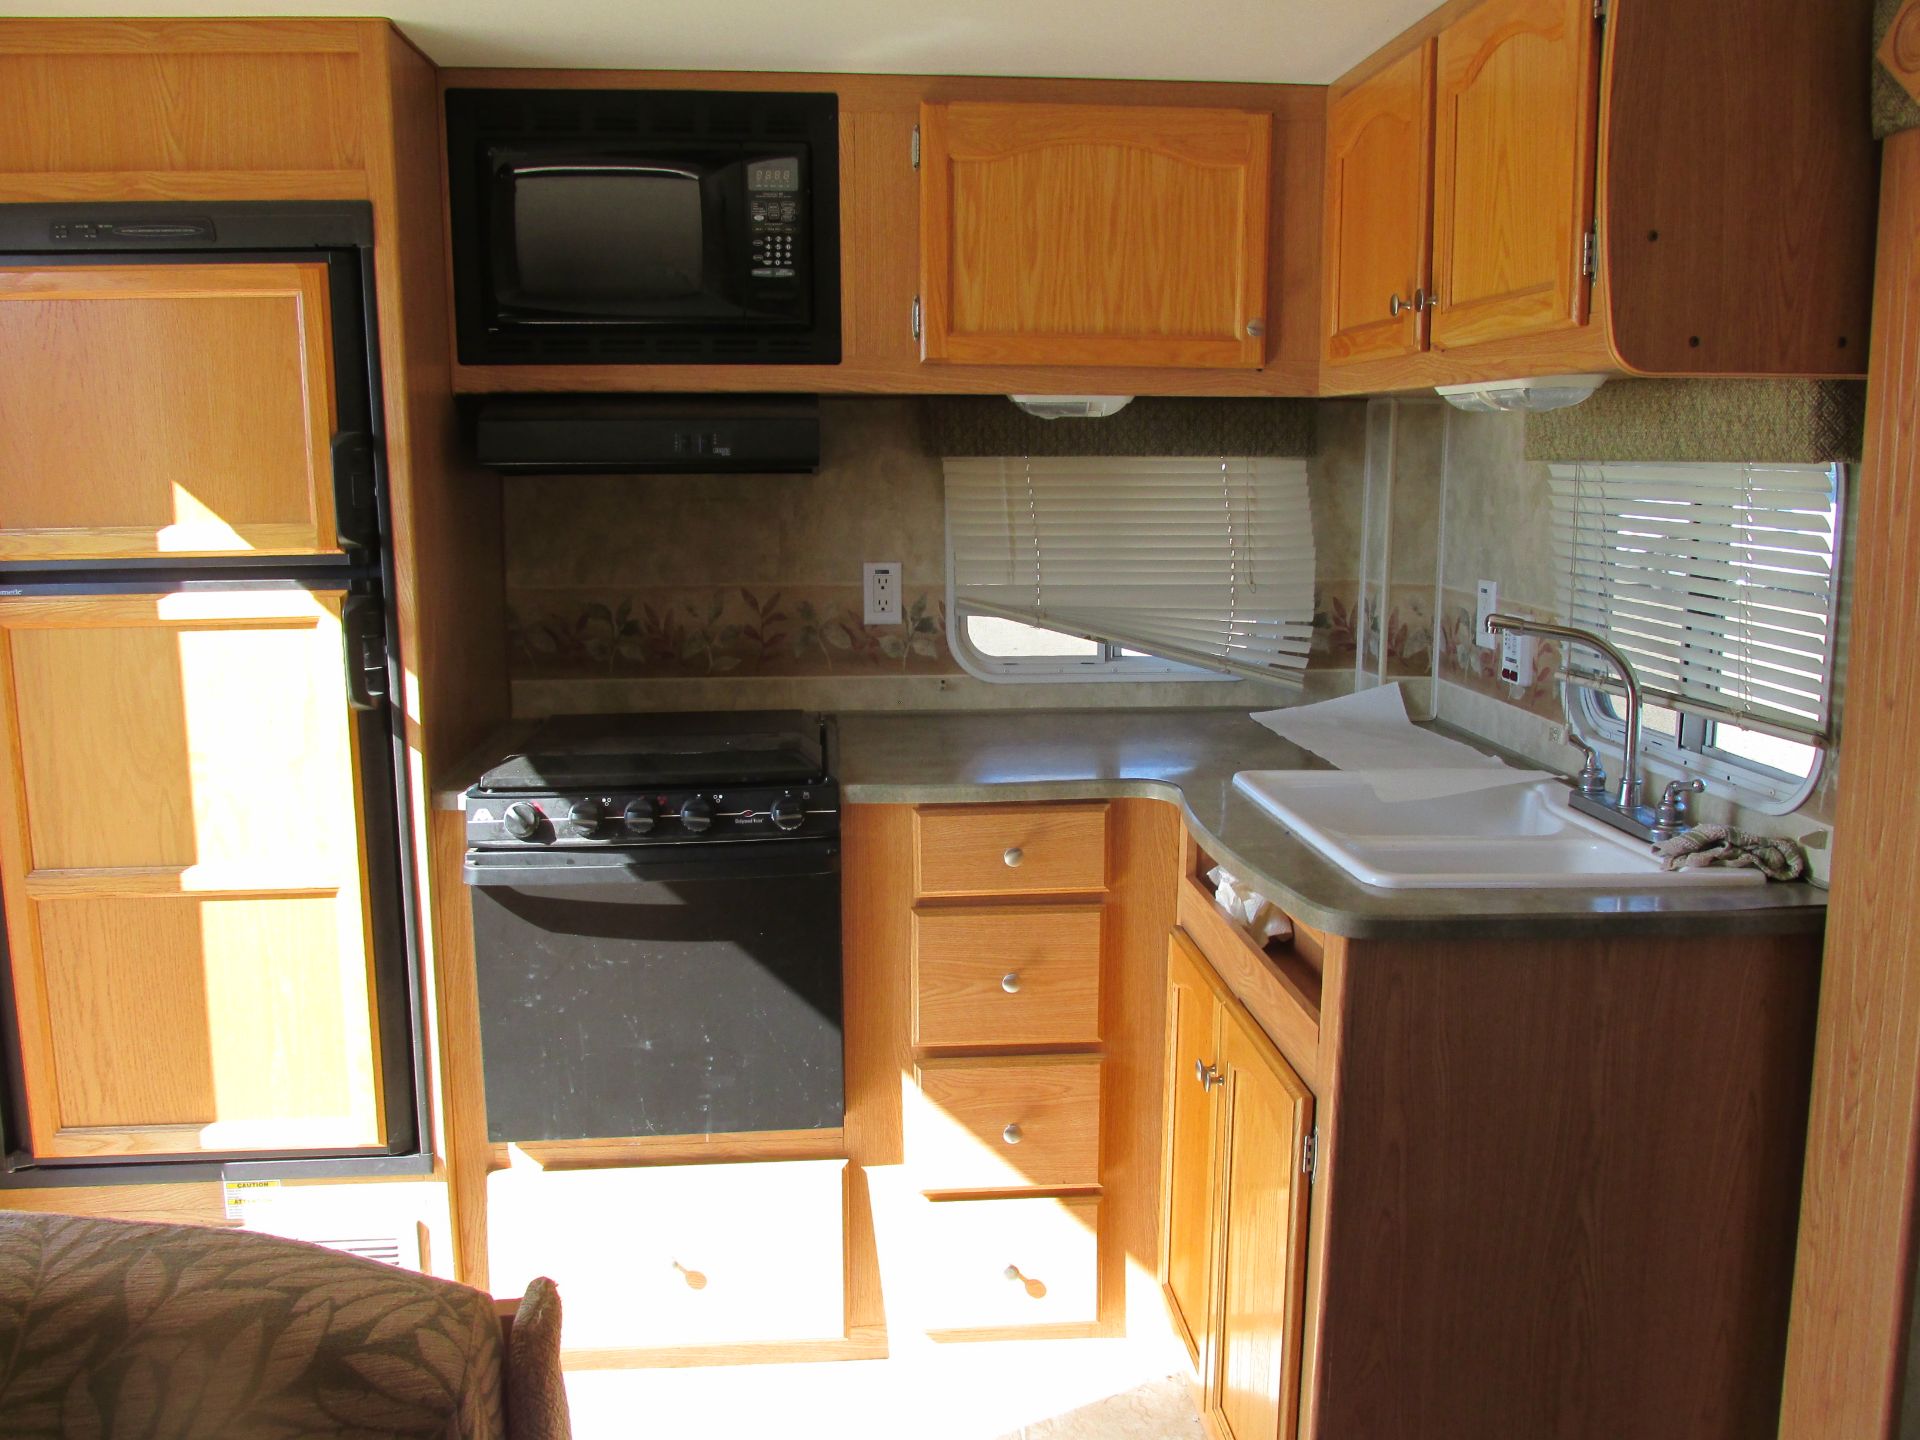 2007 FLEETWOOD TERRY RESORT 240RSK TRAVEL TRAILER SN:1EA1R242972498637 ALBERTA ACTIVE NOTES:FRONT: - Image 8 of 10